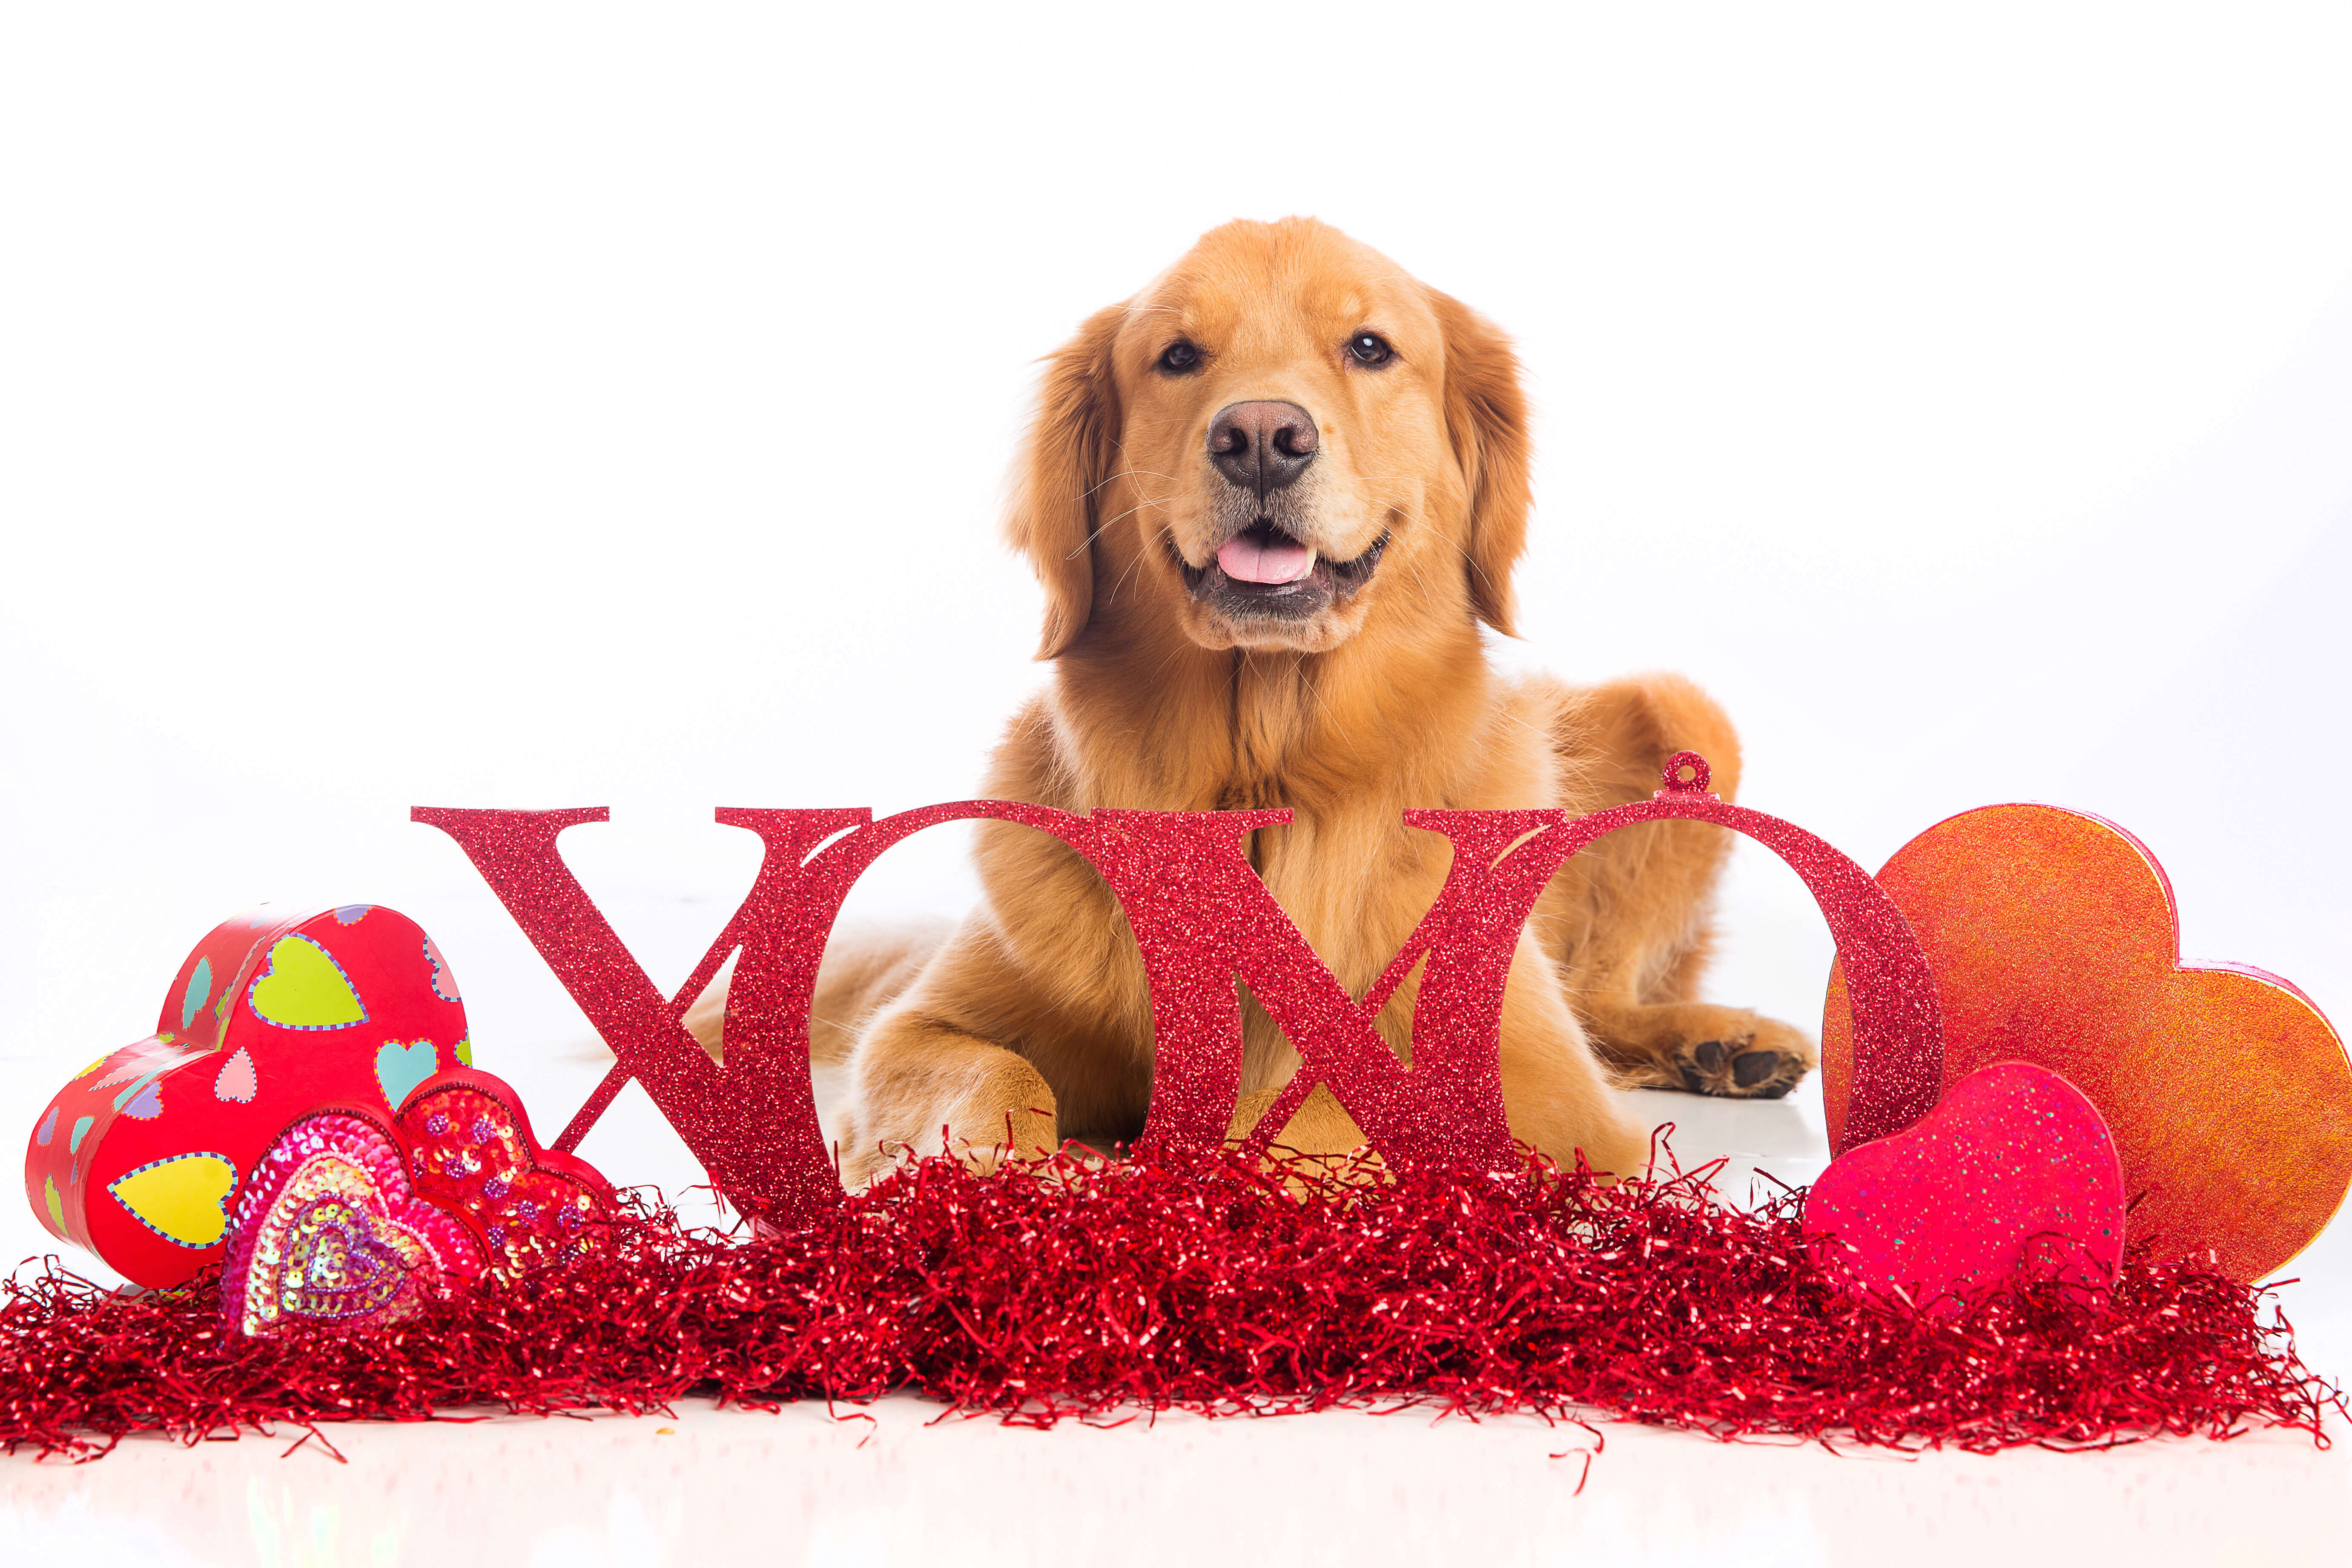 A beautiful Golden Retriever Dog laying down on Valentine’s Day - Your dog is always there for you during divorce Valentine’s Day and Divorce do not have to be all bad